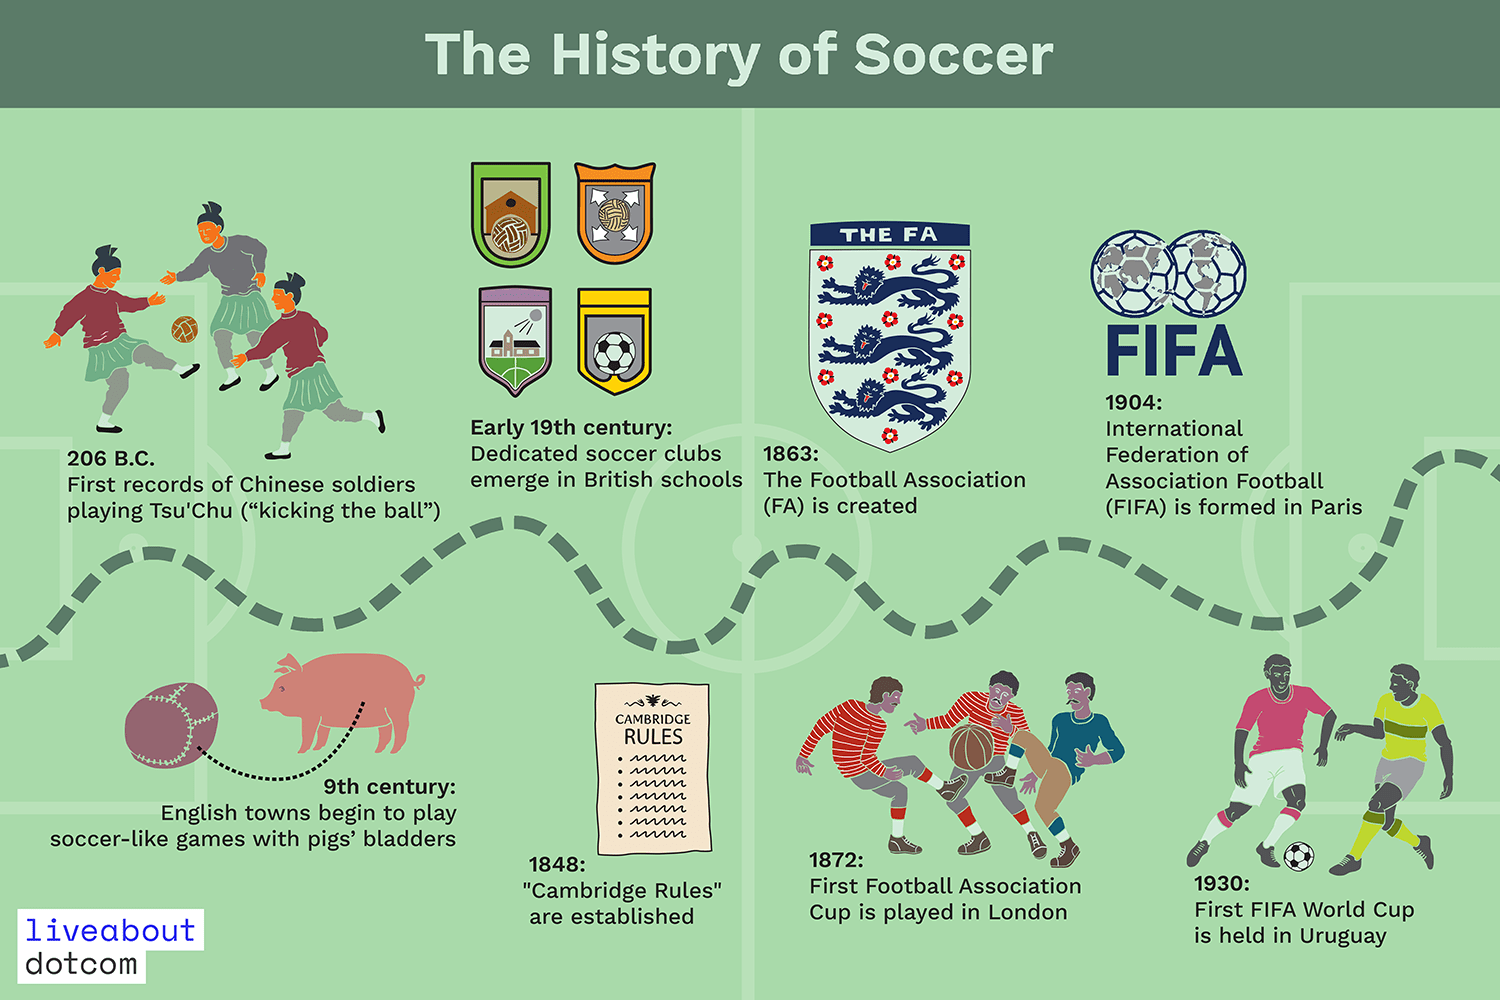 Who invented soccer?